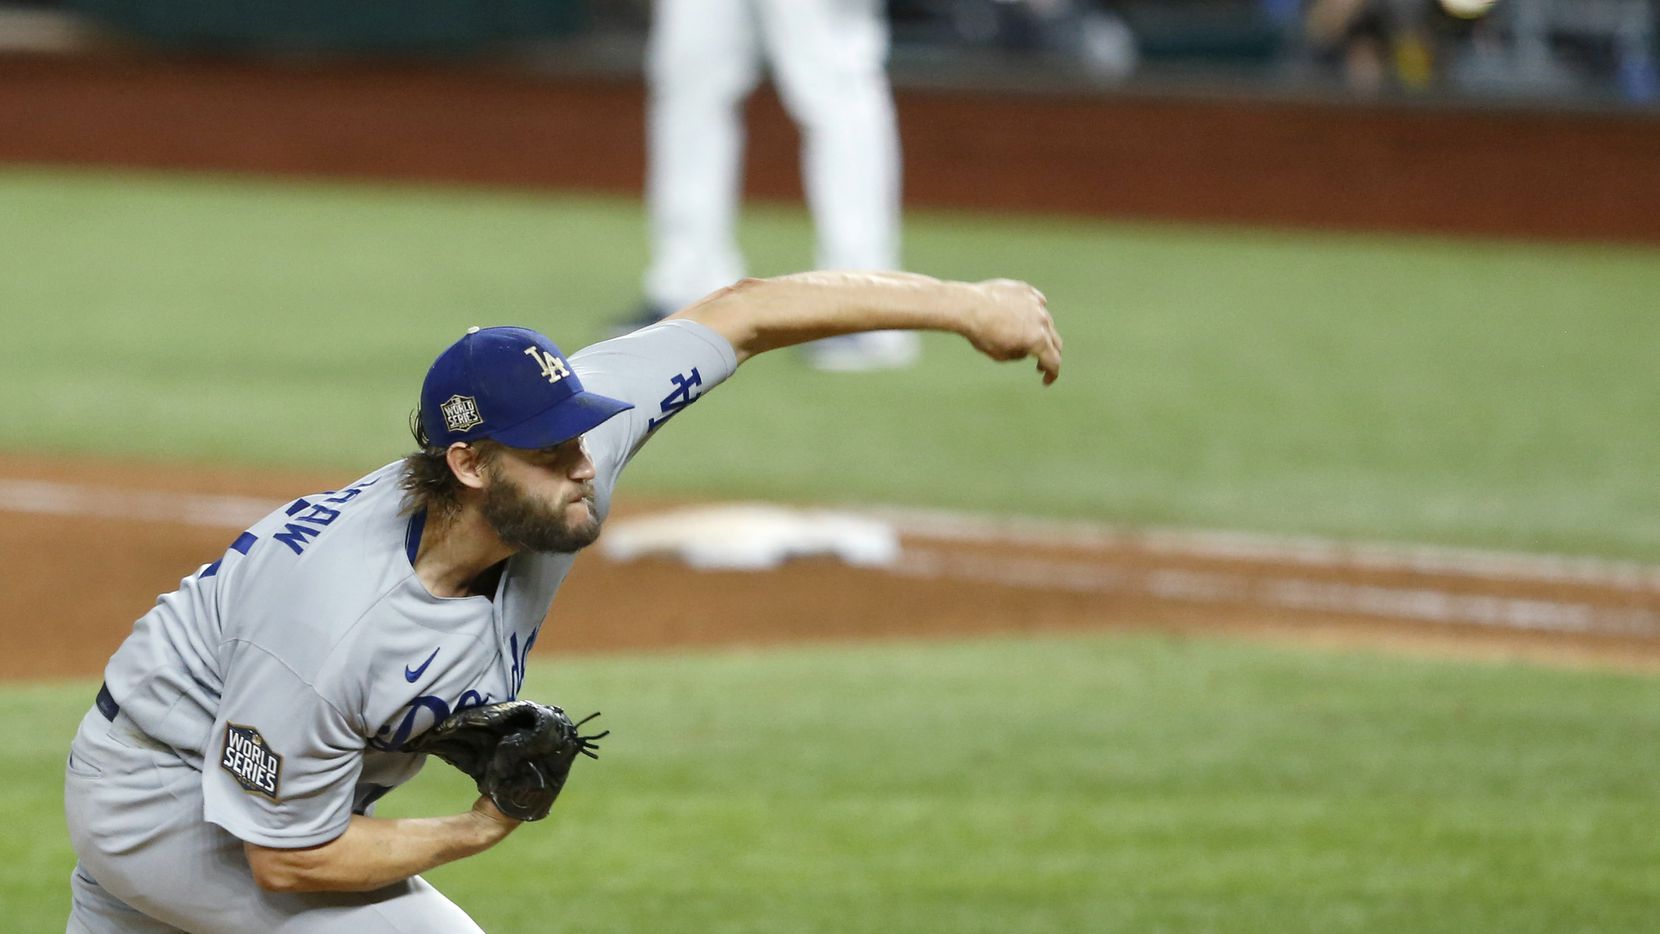 Los Angeles Dodgers starting pitcher Clayton Kershaw (22) pitches in a game against the Tampa Bay Rays during the sixth inning of game five of the World Series at Globe Life Field on Sunday, October 25, 2020 in Arlington, Texas.